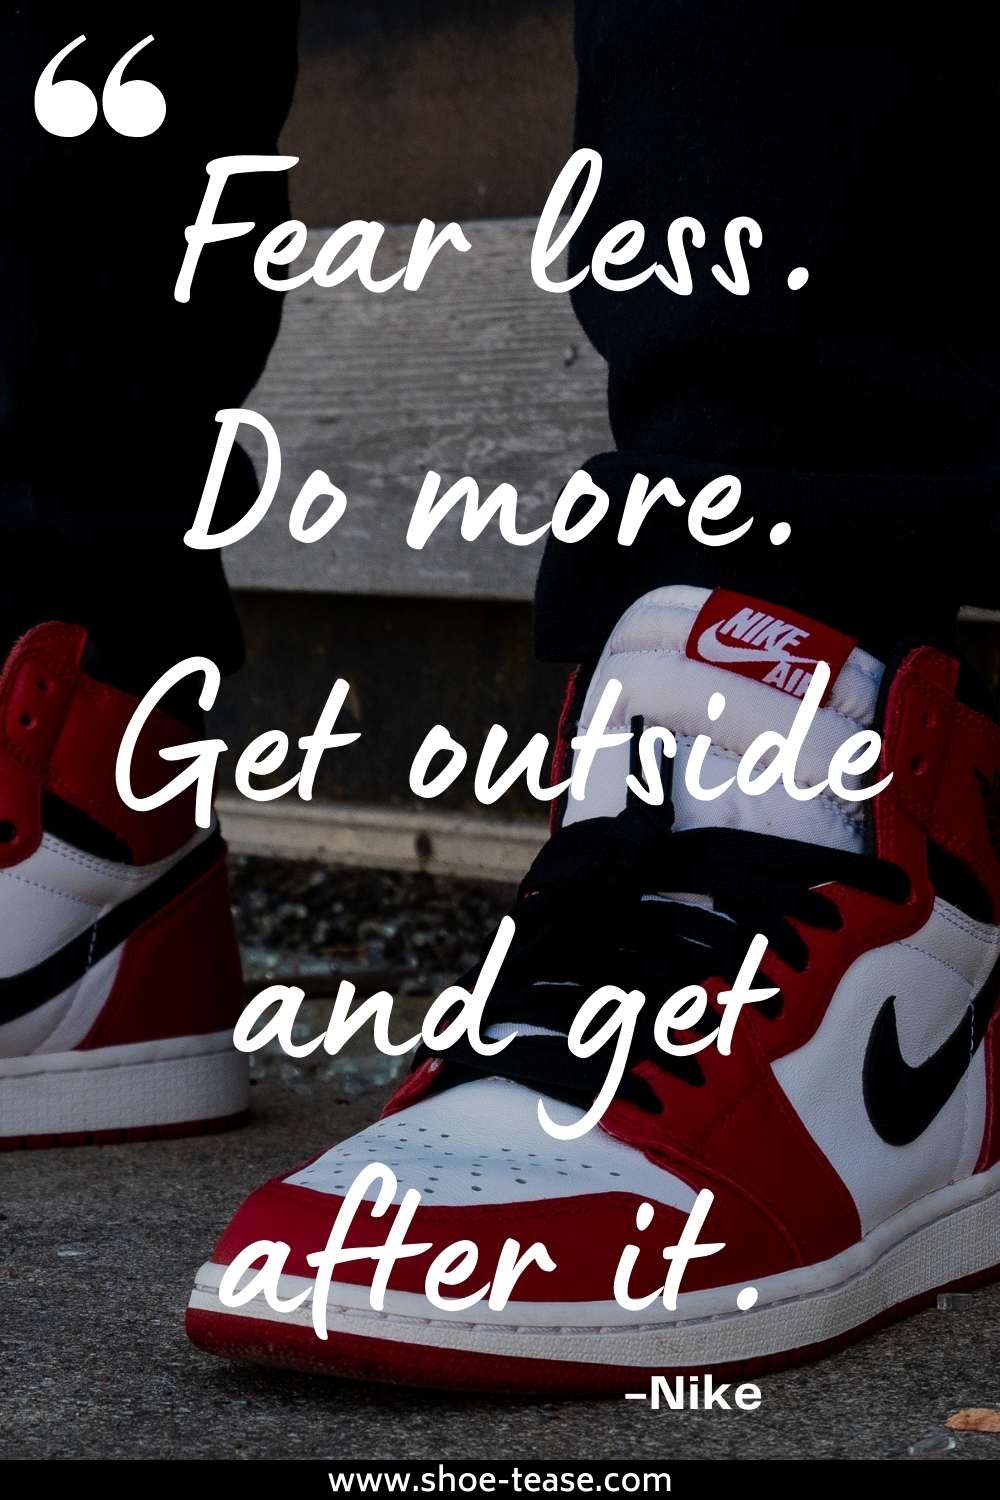 Nike Quote reading Fear less. Do more. Get outside and get after it over and pair of air jordan 1 sneakers.